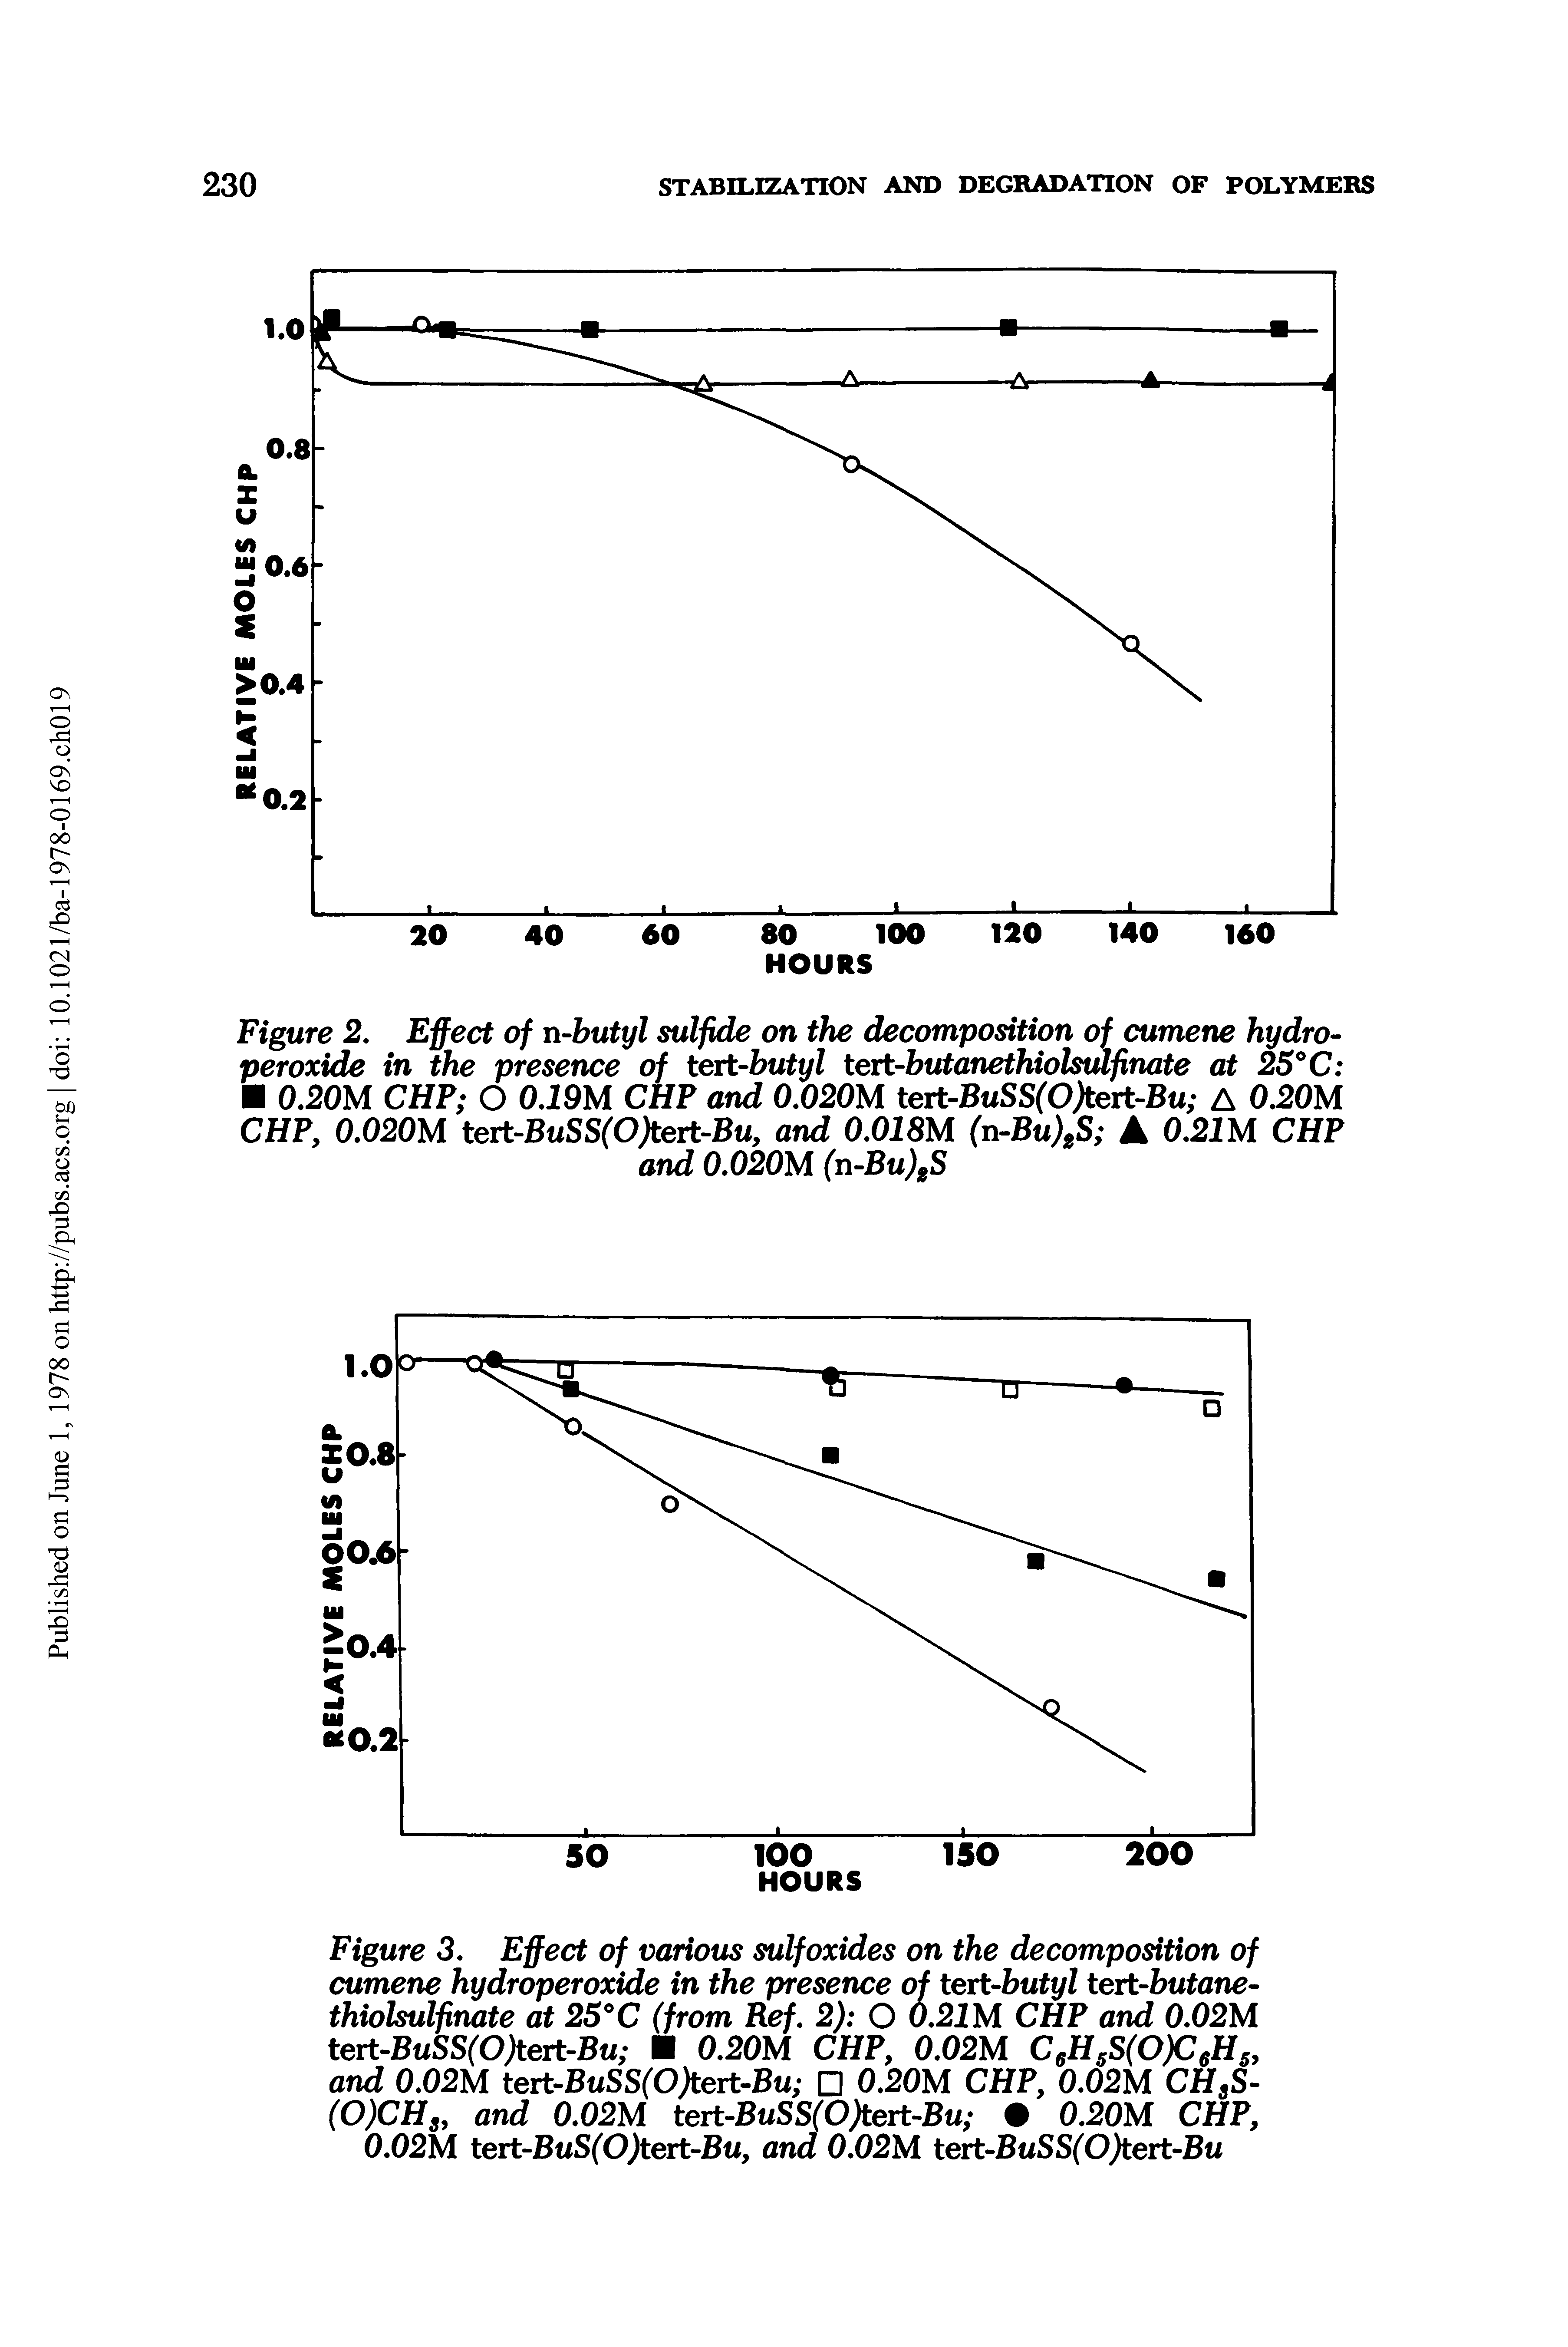 Figure 3. Effect of various sulfoxides on the decomposition of cumene hydroperoxide in the presence of tert-butyl tert-butane-thiolsulfinate at 25° C (from Ref. 2) O 0.21M CHP and 0.02M tert-BuSS(0)tert-Bu 0.20M CHP, 0.02M C6H5S(0)C6H5, and 0.02M tert-BuSS(0)tert-Bu 0.20M CHP, 0.02M CHsS-(0)CHs, and 0.02M tert-BuSS(0)tert-Bu 0.20M CHP, 0.02M tert-BuS(0)tert-Bu, and 0.02M tert-BuSS(0)tert-Bu...